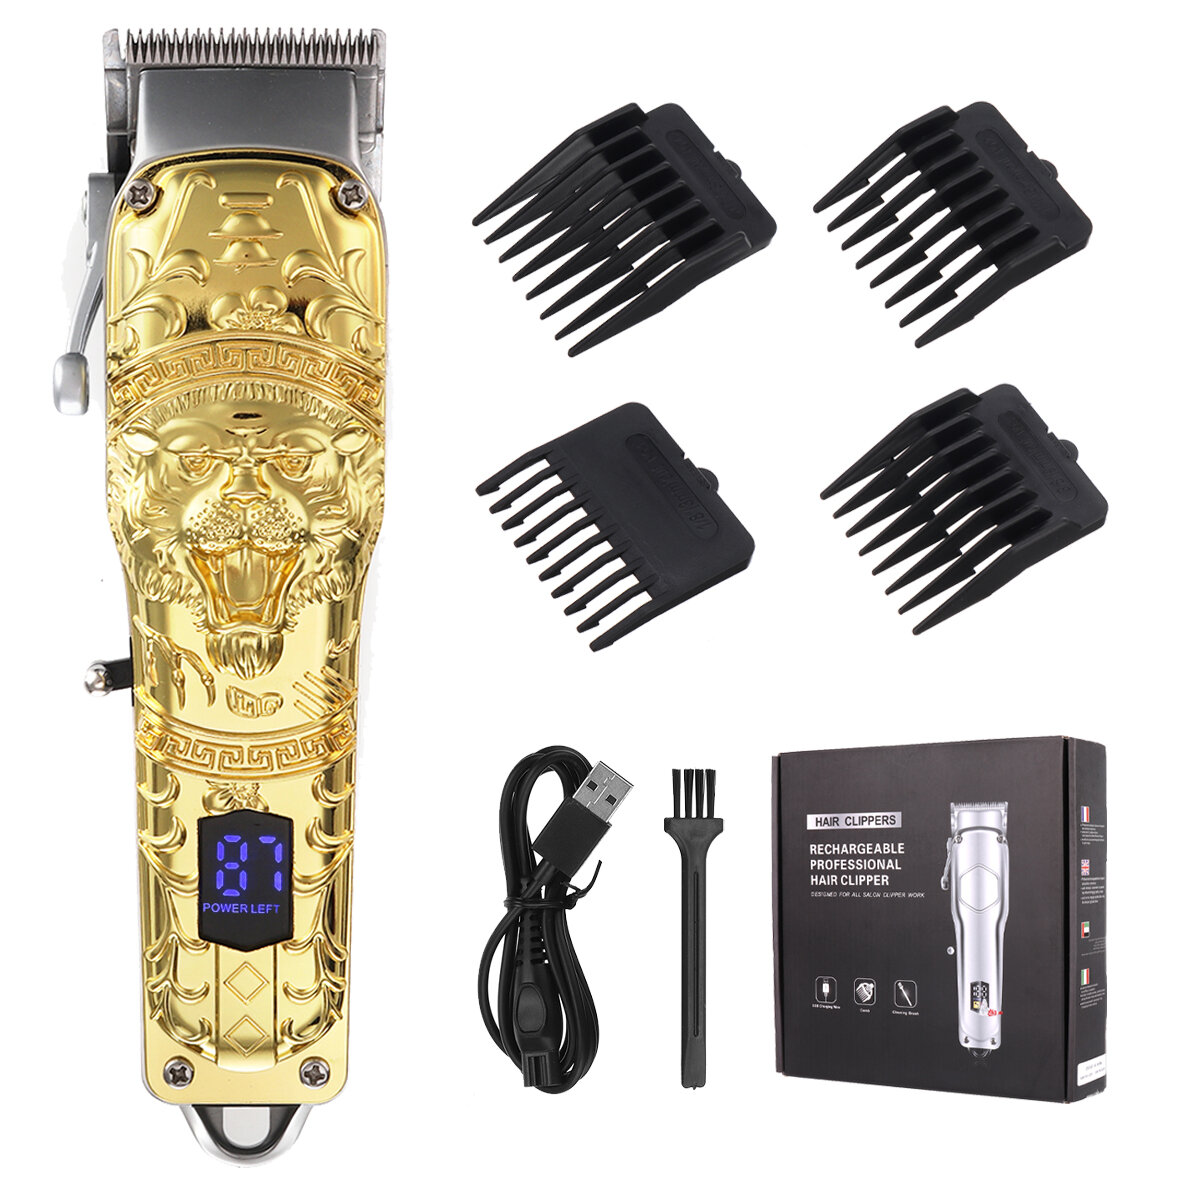 01 3mm 4 Gear Electric Hair Clipper Men All metal Rechargeable Hair Trimmer Shaver Barber W 4pcs Limit Combs